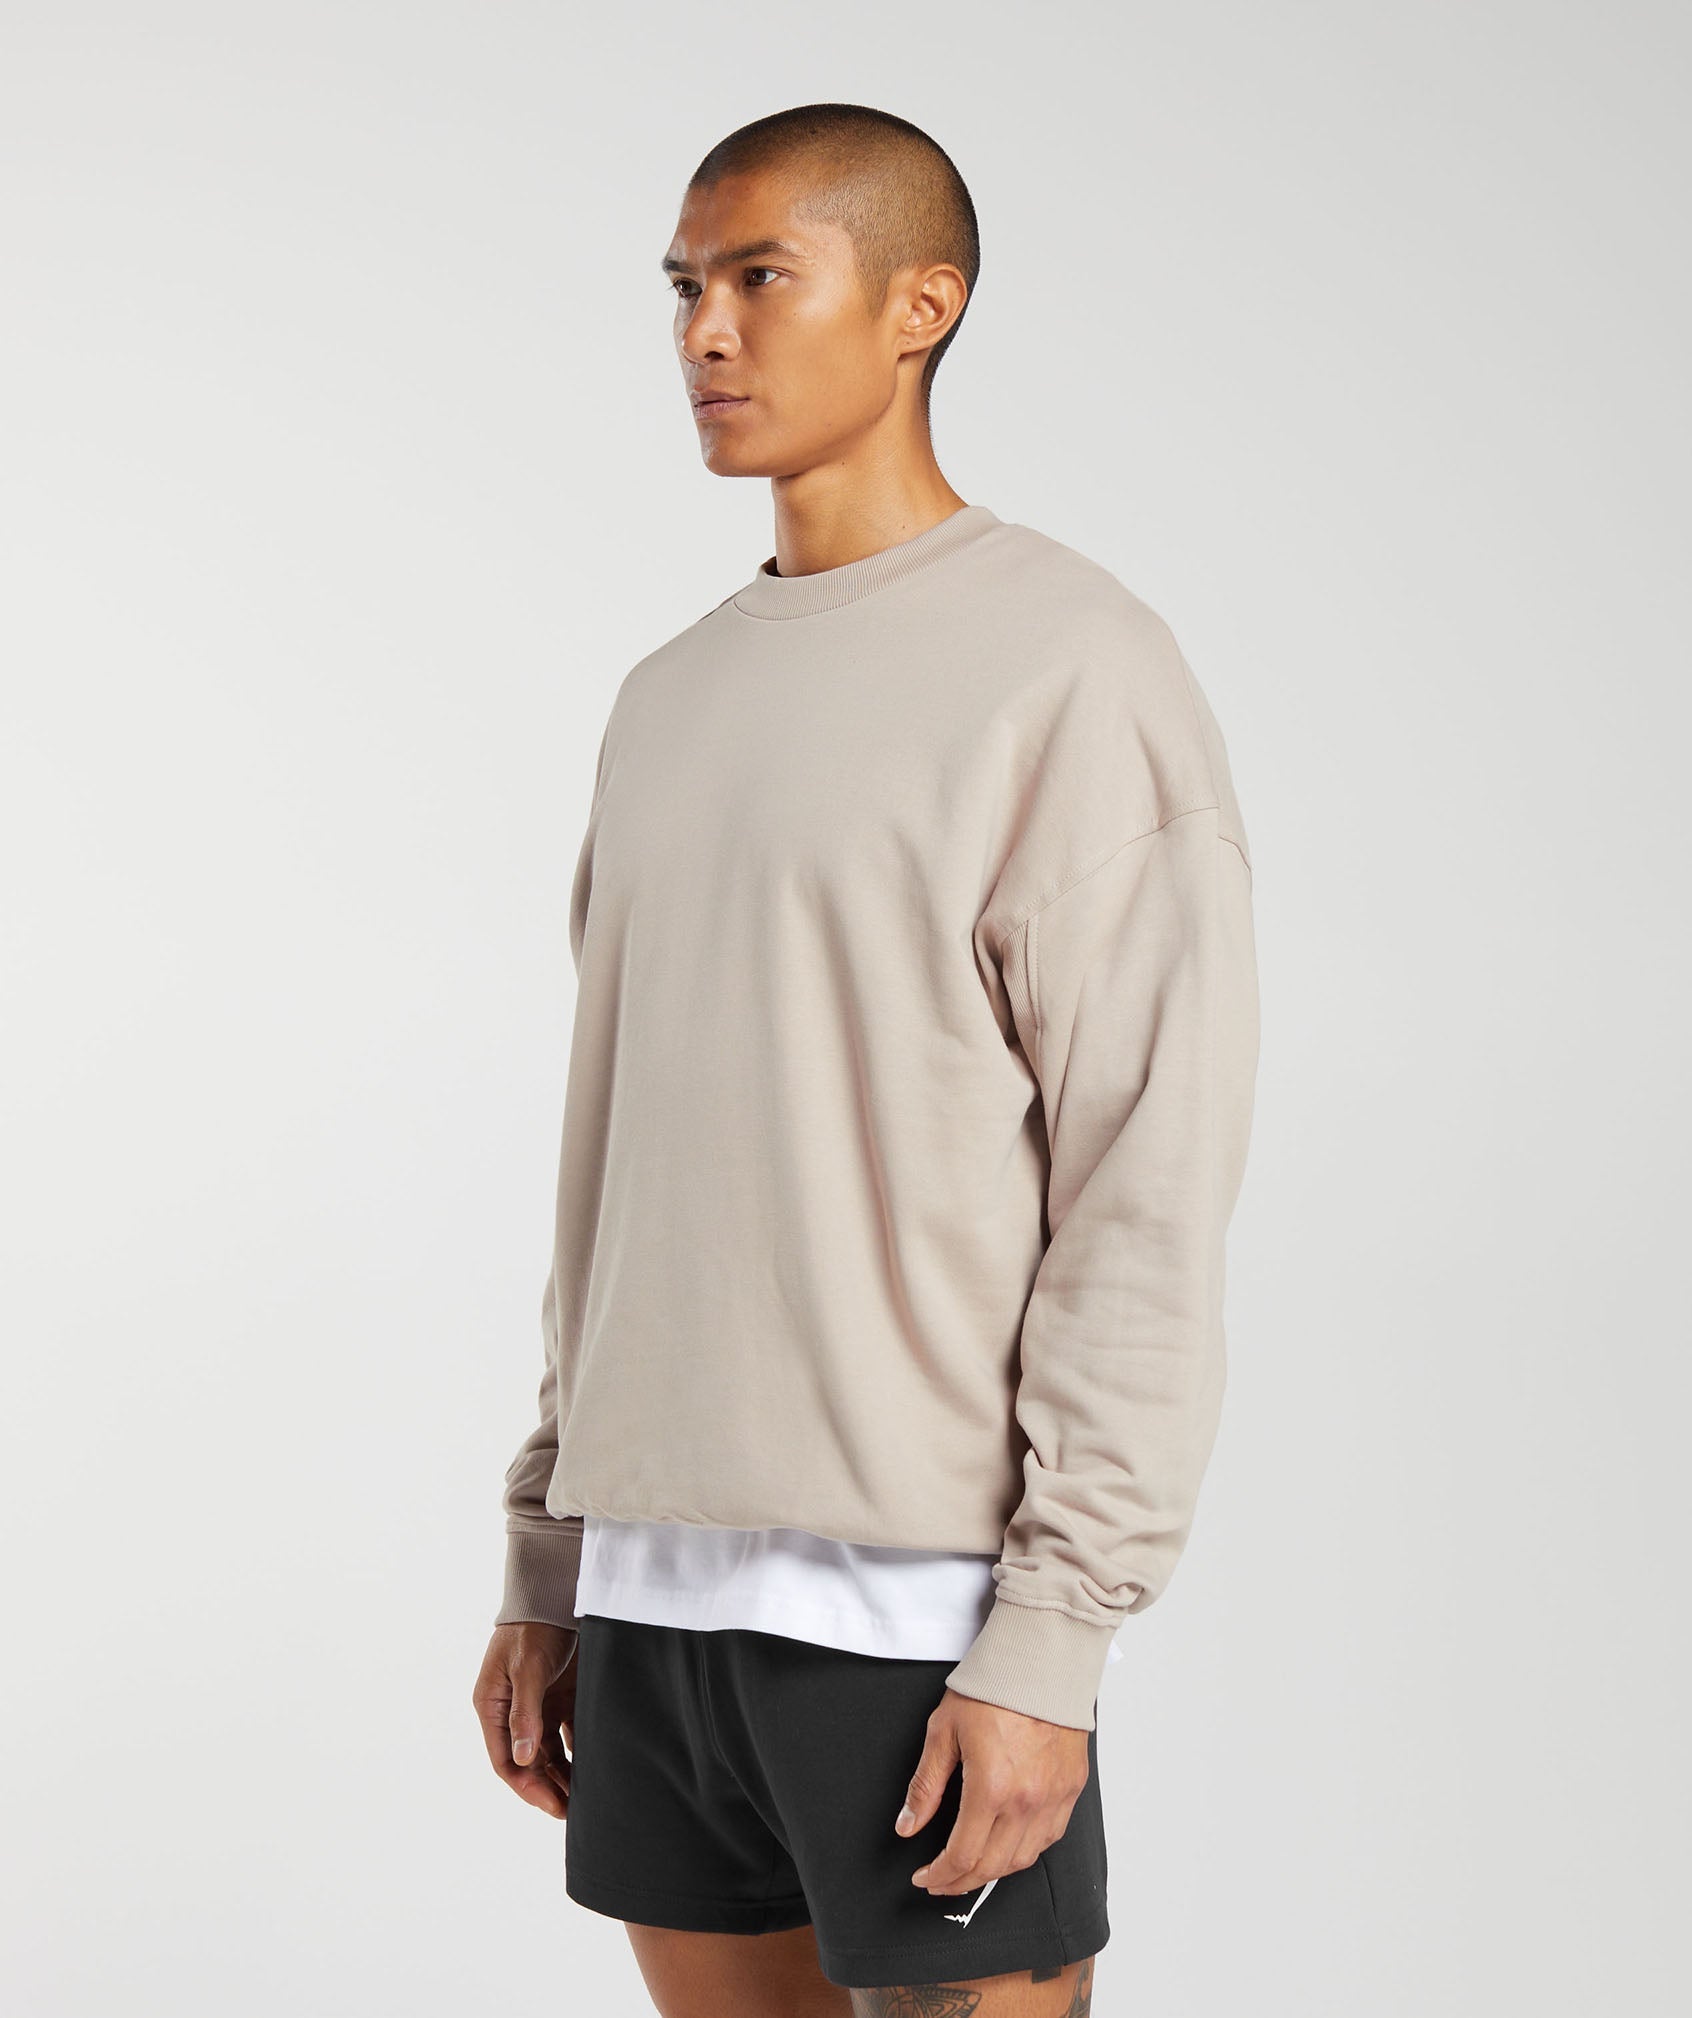 Rest Day Essential Crew in Stone Pink - view 3